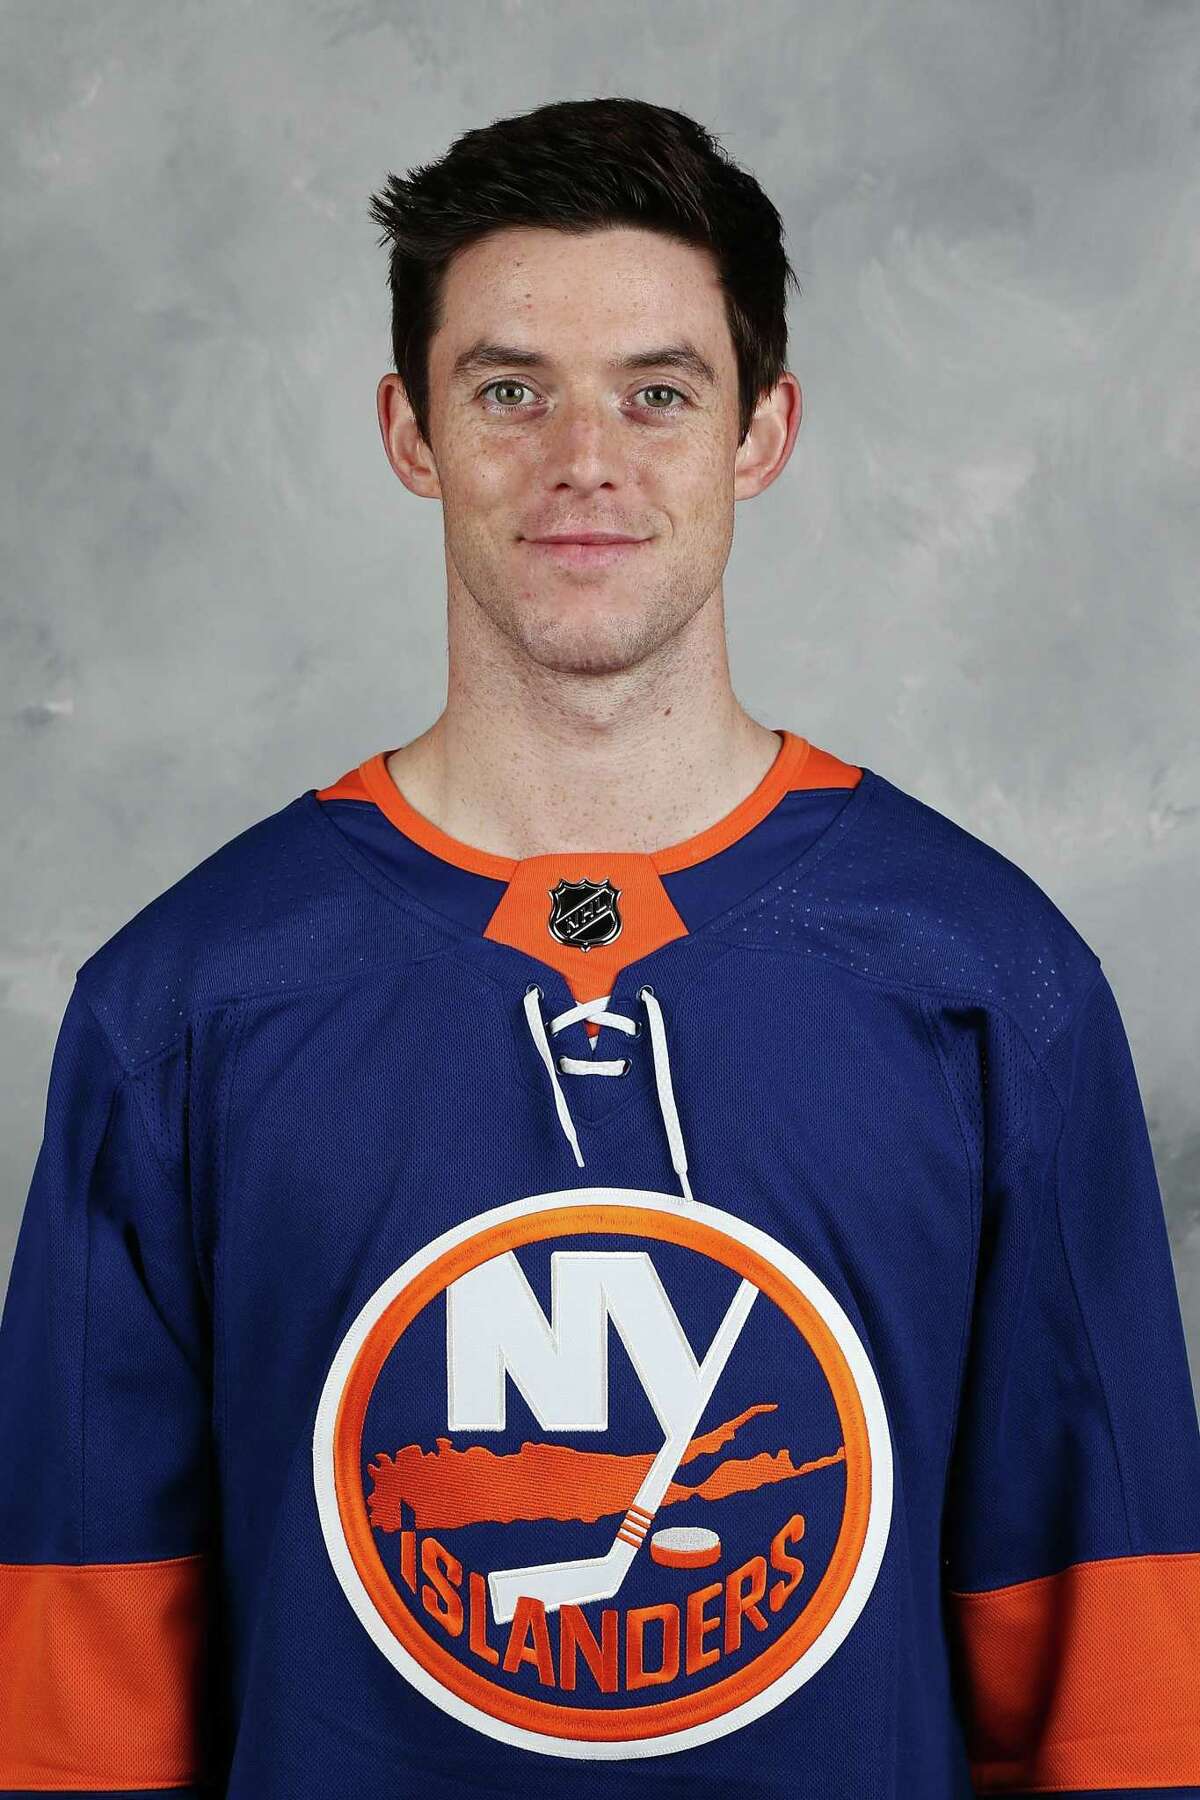 EAST MEADOW, NEW YORK - SEPTEMBER 12: Thomas Hickey of the New York Islanders poses for his official headshot for the 2019-2020 season on September 12, 2019 at the Northwell Health Ice Center in East Meadow, New York. (Photo by Mike Stobe/NHLI via Getty Images)